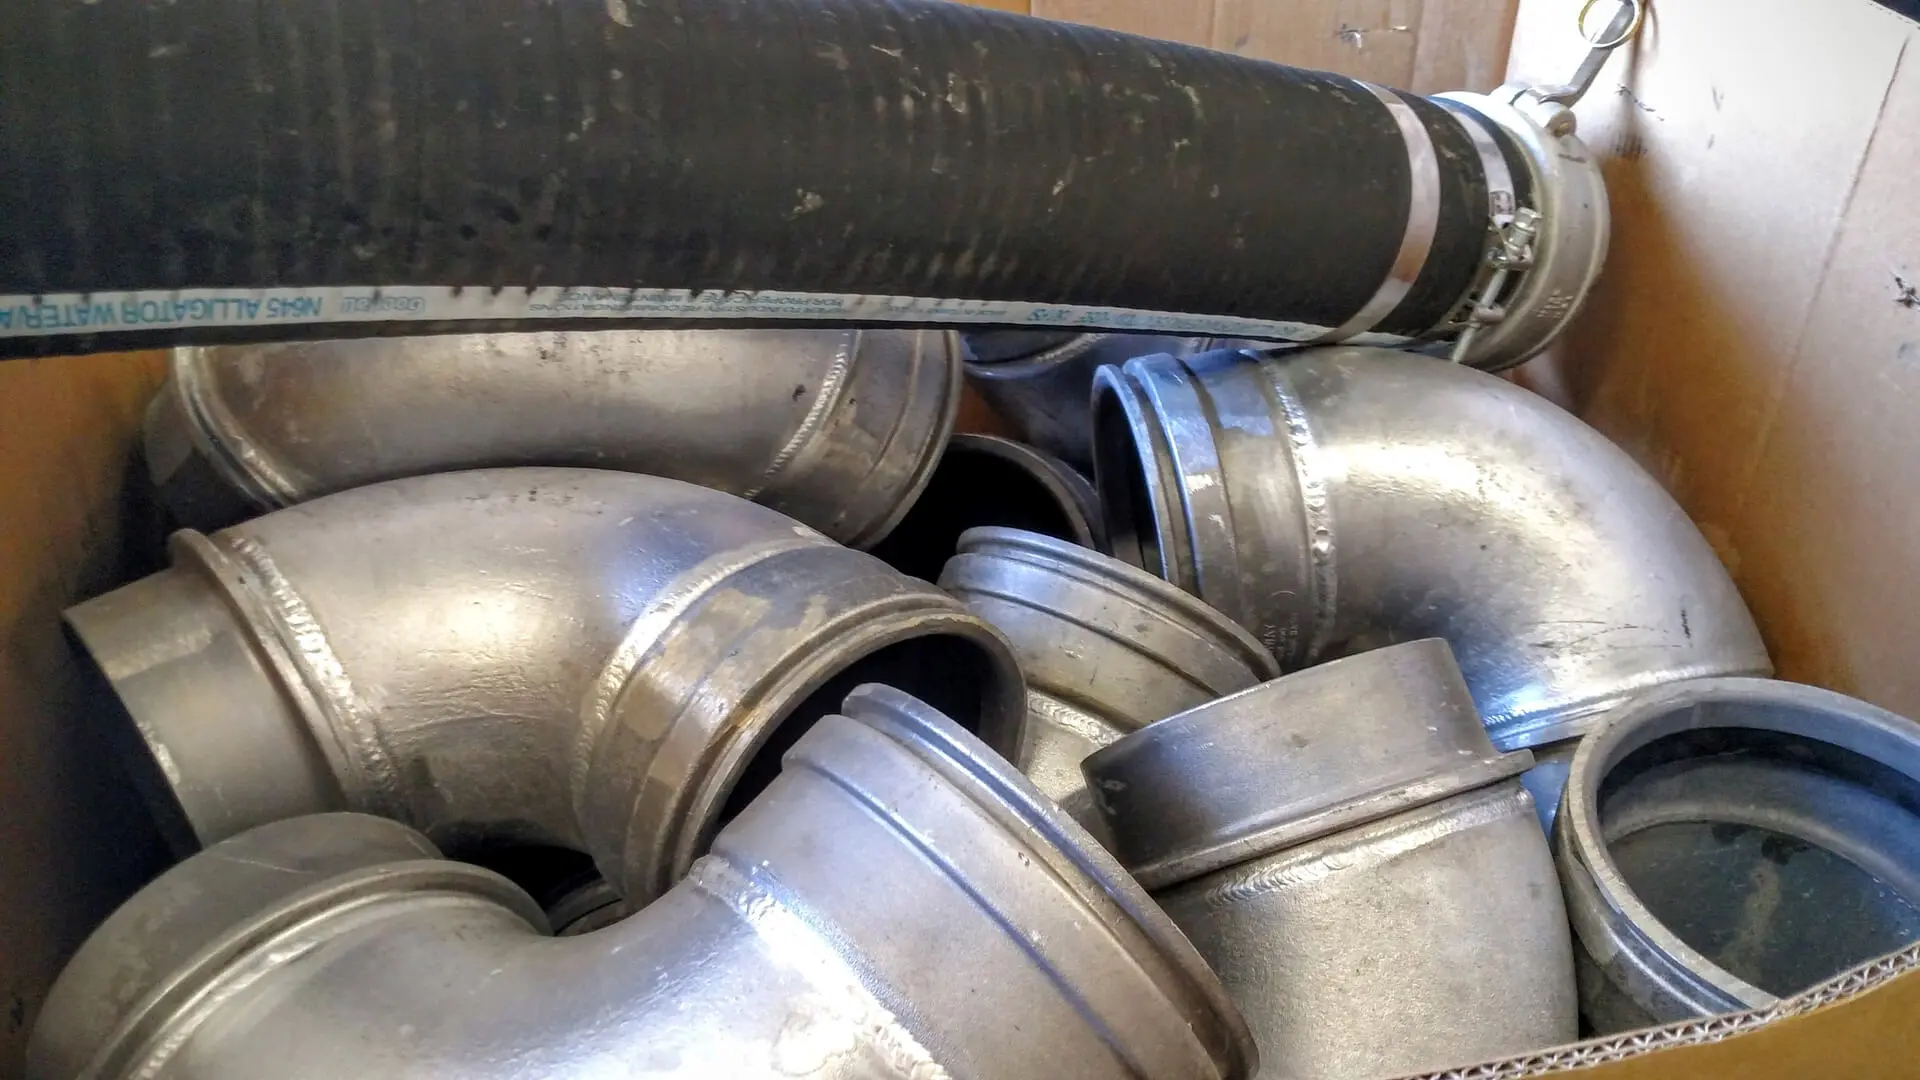 A pile of metal pipes sitting next to each other.